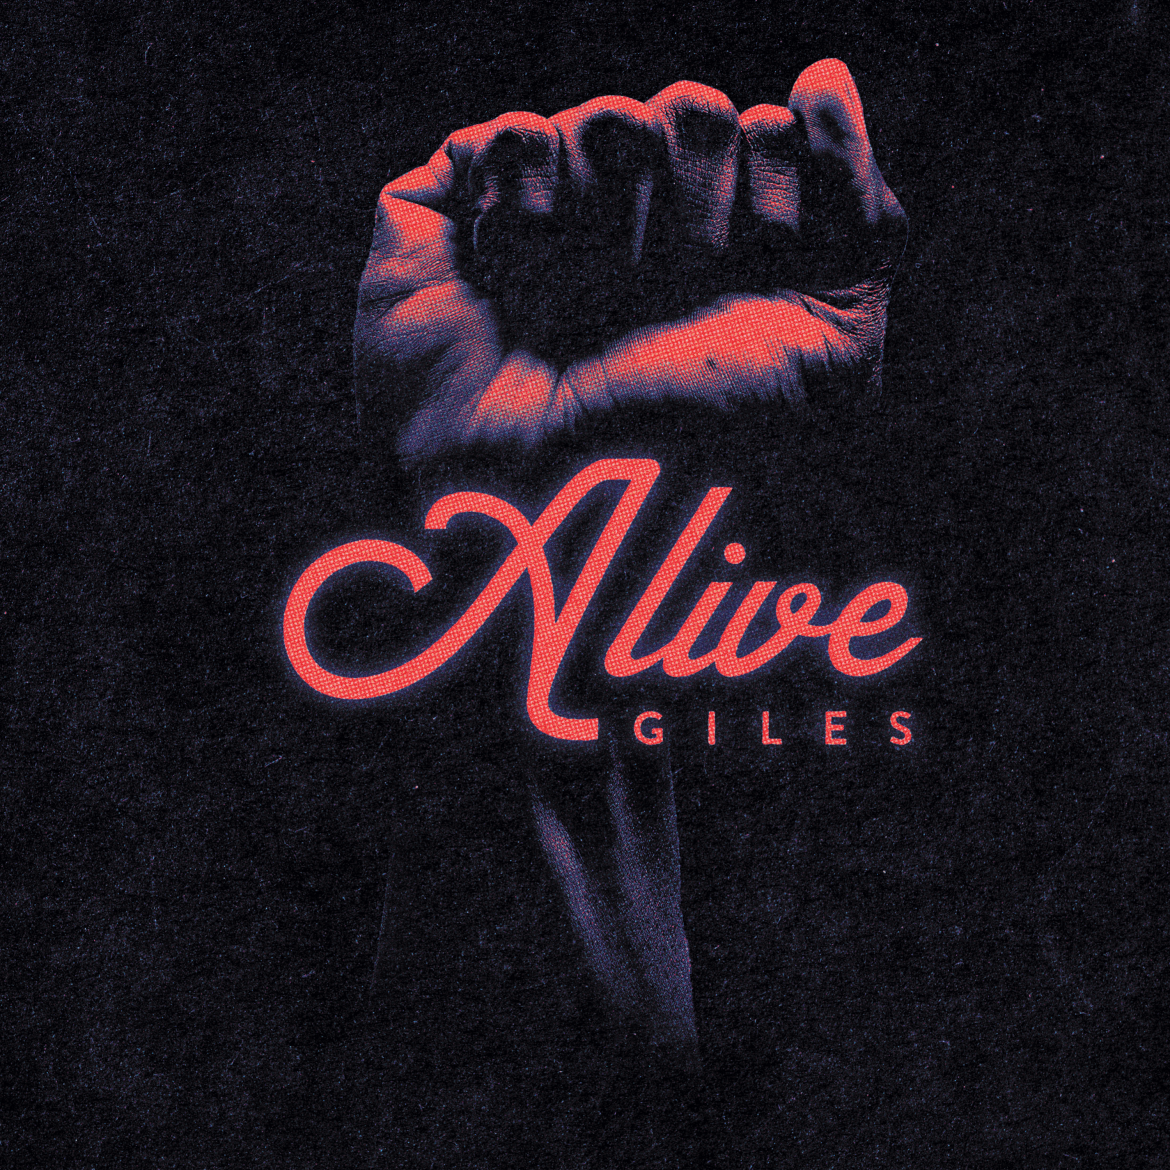 The new single ‘Alive’ from ‘Giles’ with it’s efficient and strong rap/flow and huge chorus is on the Bafana FM Africa playlist now